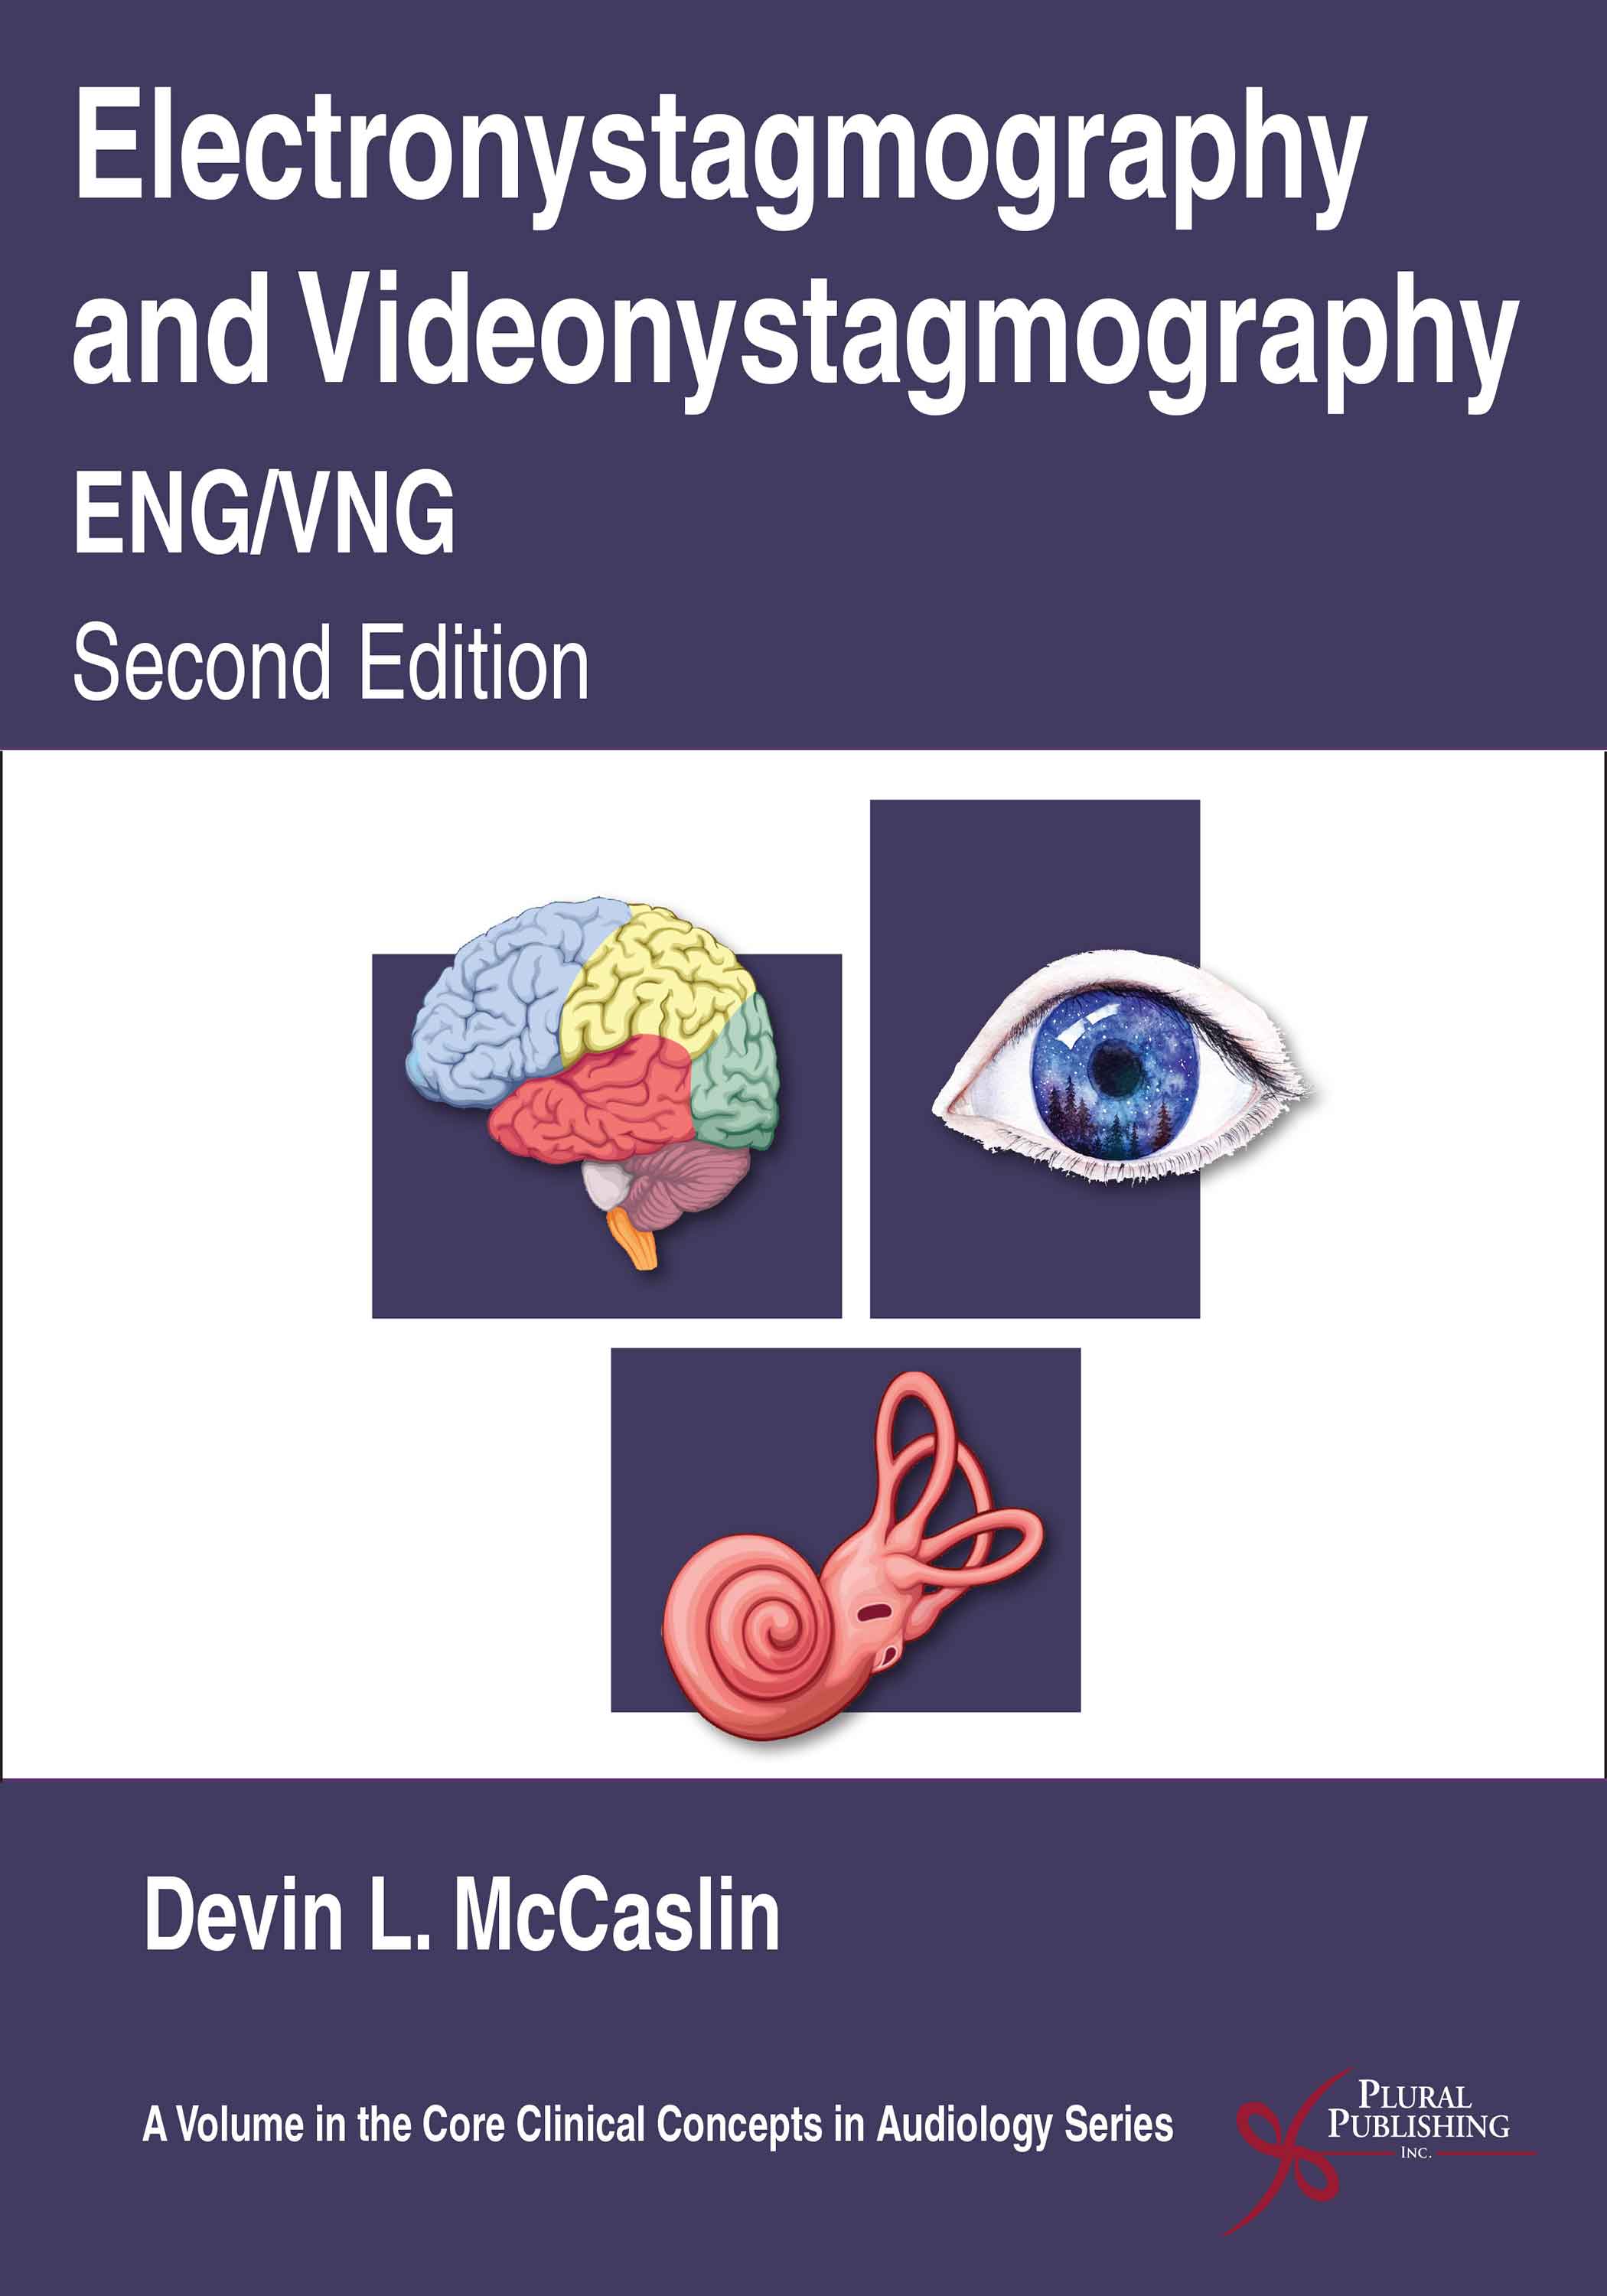 Electronystagmography/Videonystagmography (ENG/VNG), Second Edition